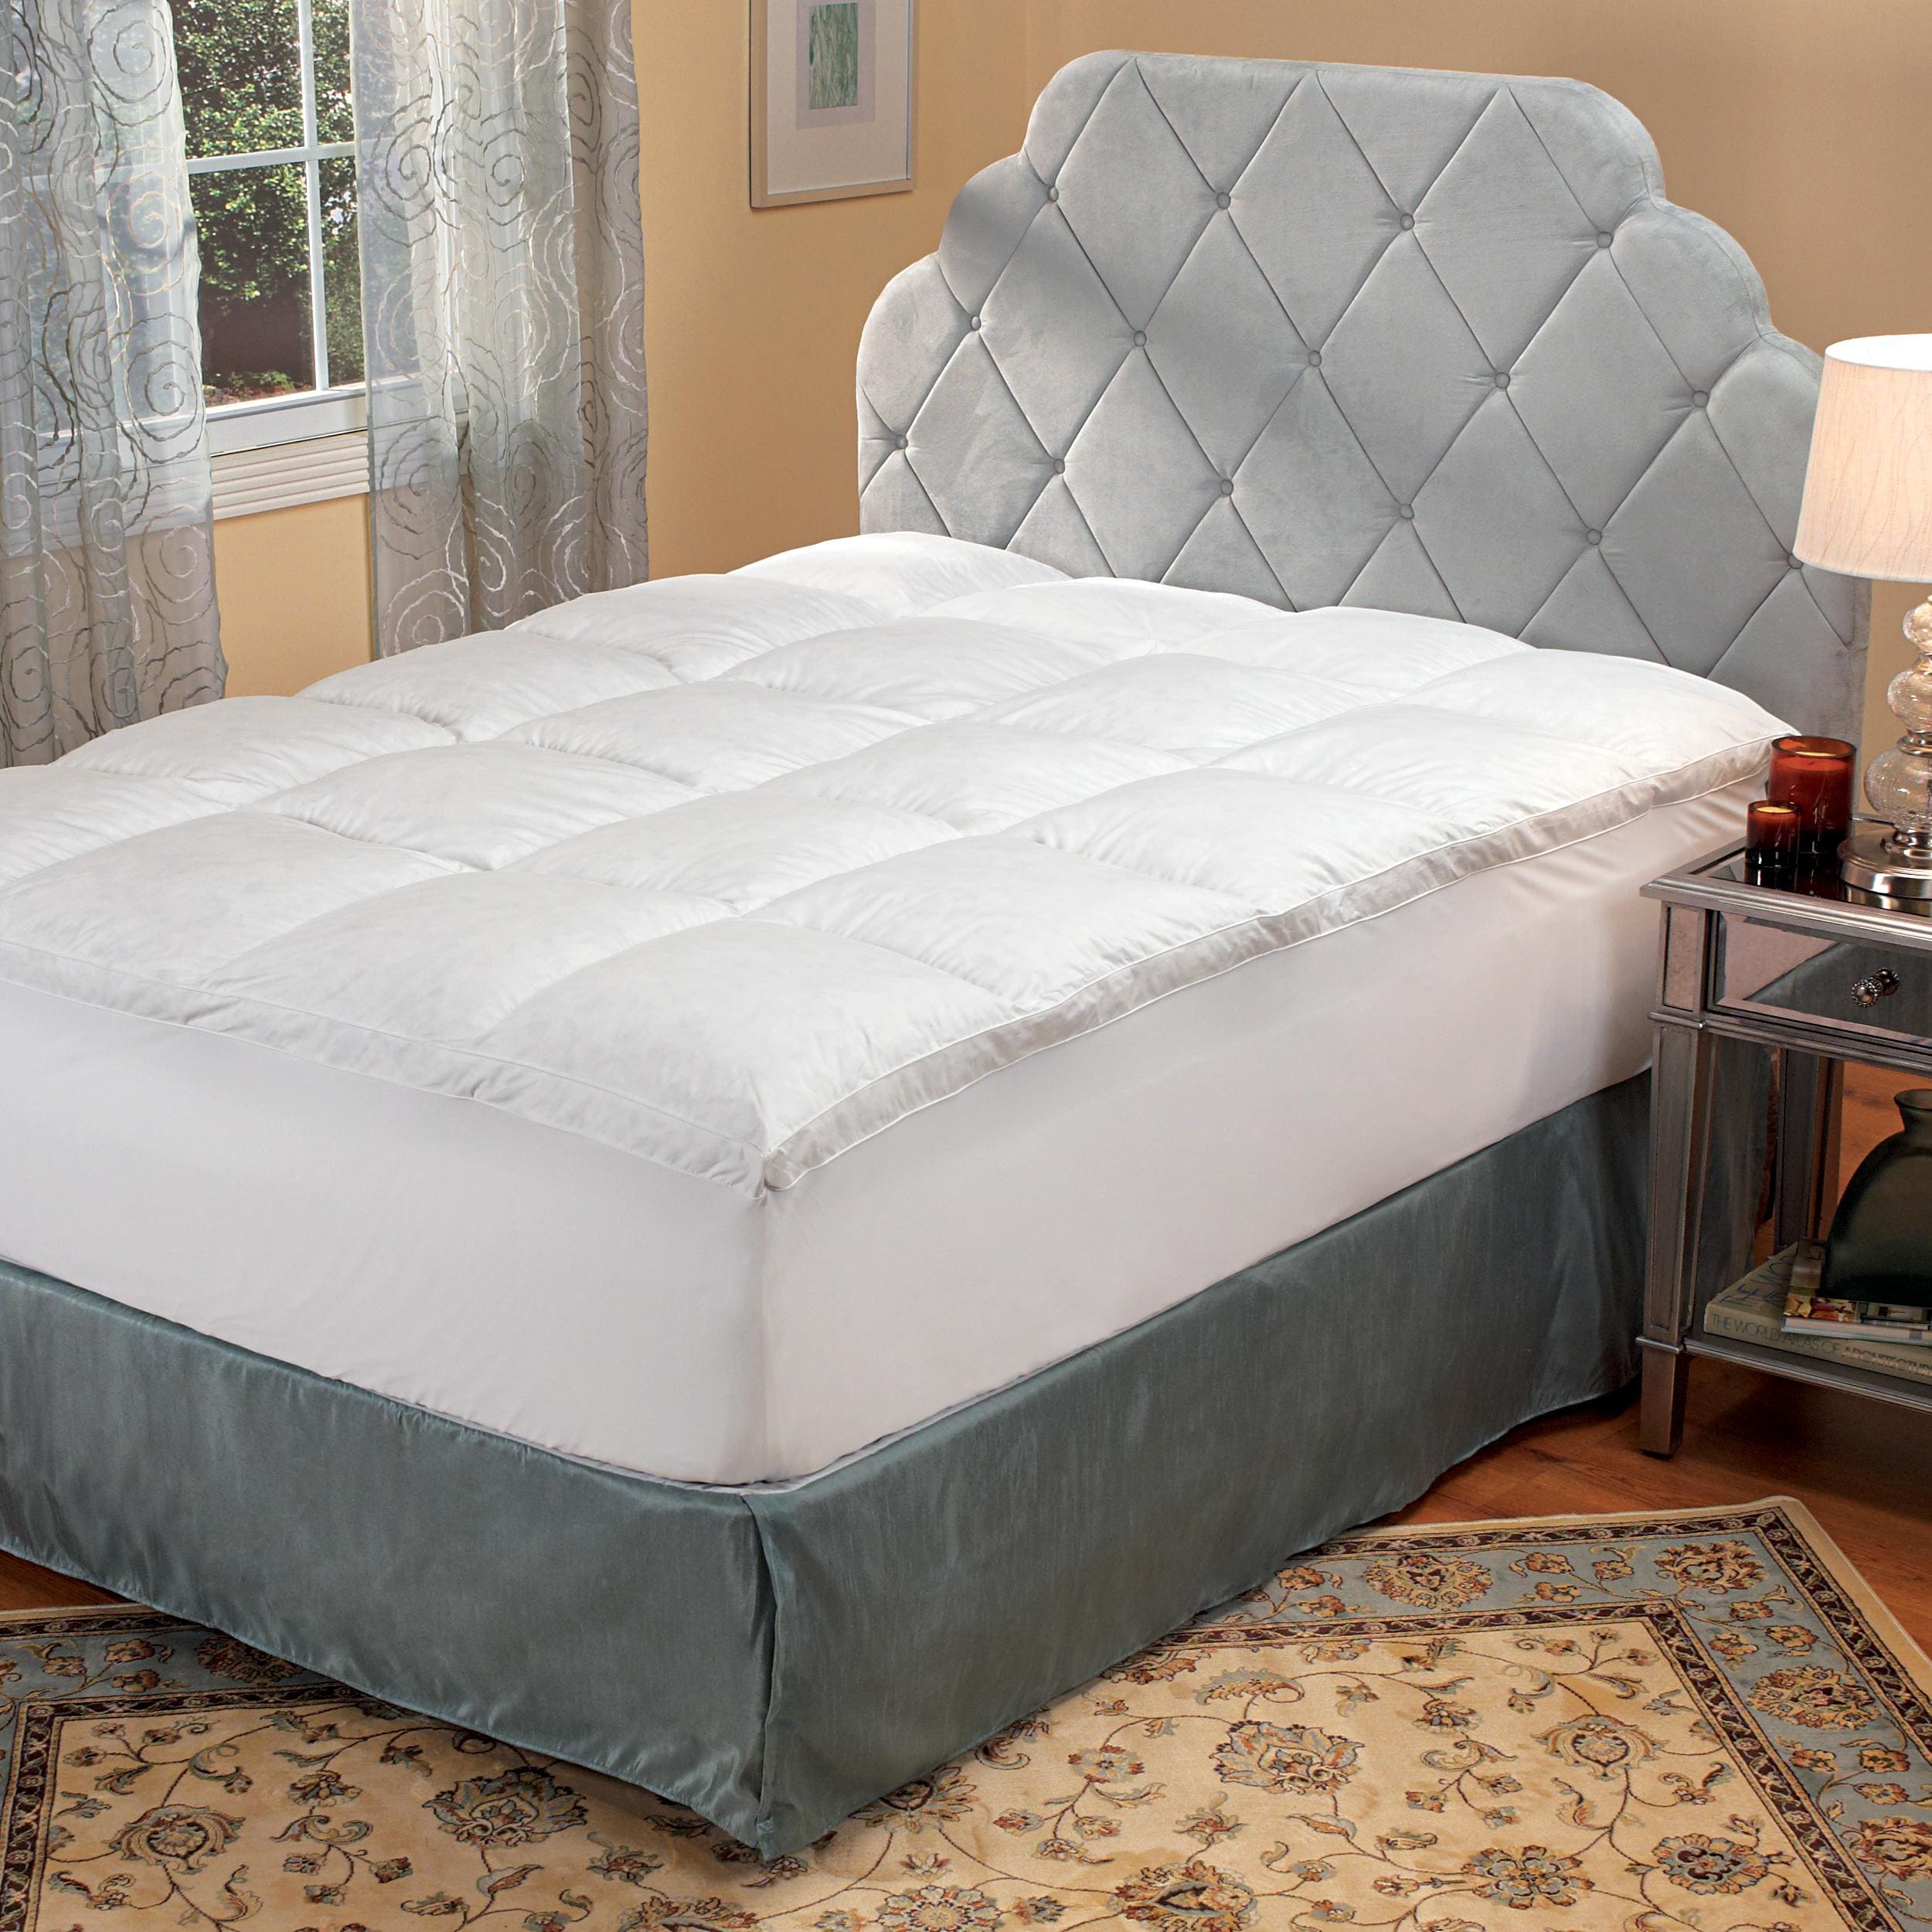 Shop Framed Box Twin/ Twin XL-size Fiberbed with No Shift ...